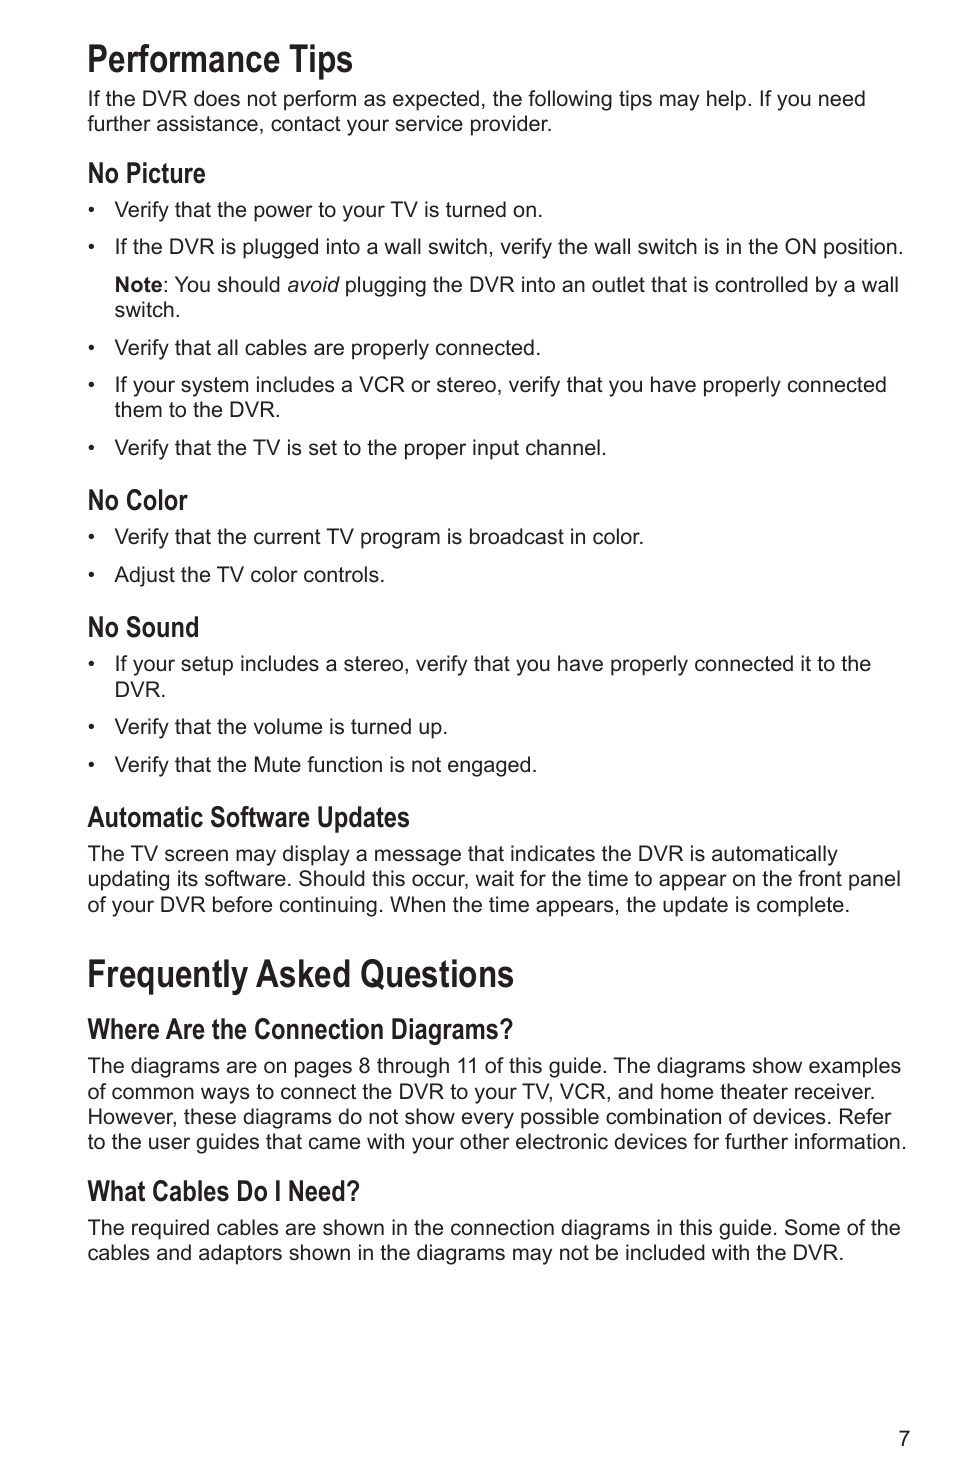 Performance tips, Frequently asked questions, No picture | No color, No sound, Automatic software updates, Where are the connection diagrams, What cables do i need | Cisco Explorer 8300 User Manual | Page 13 / 20